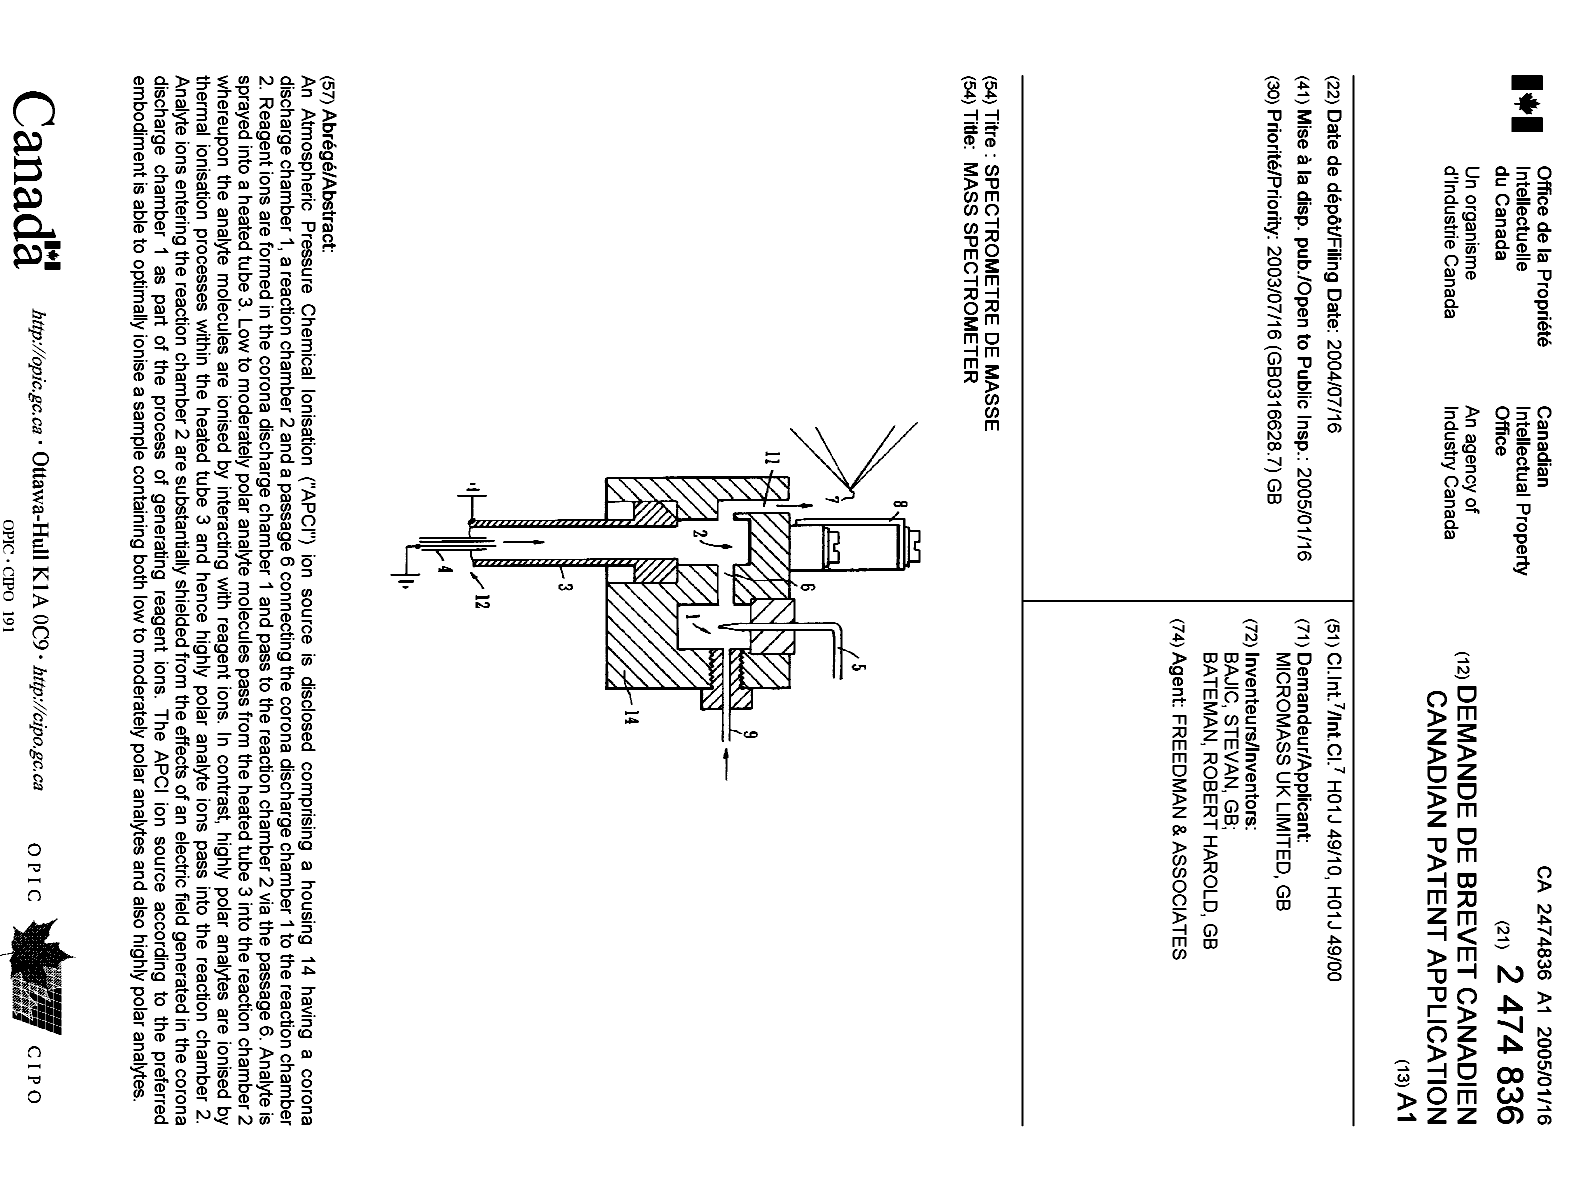 Canadian Patent Document 2474836. Cover Page 20041229. Image 1 of 1